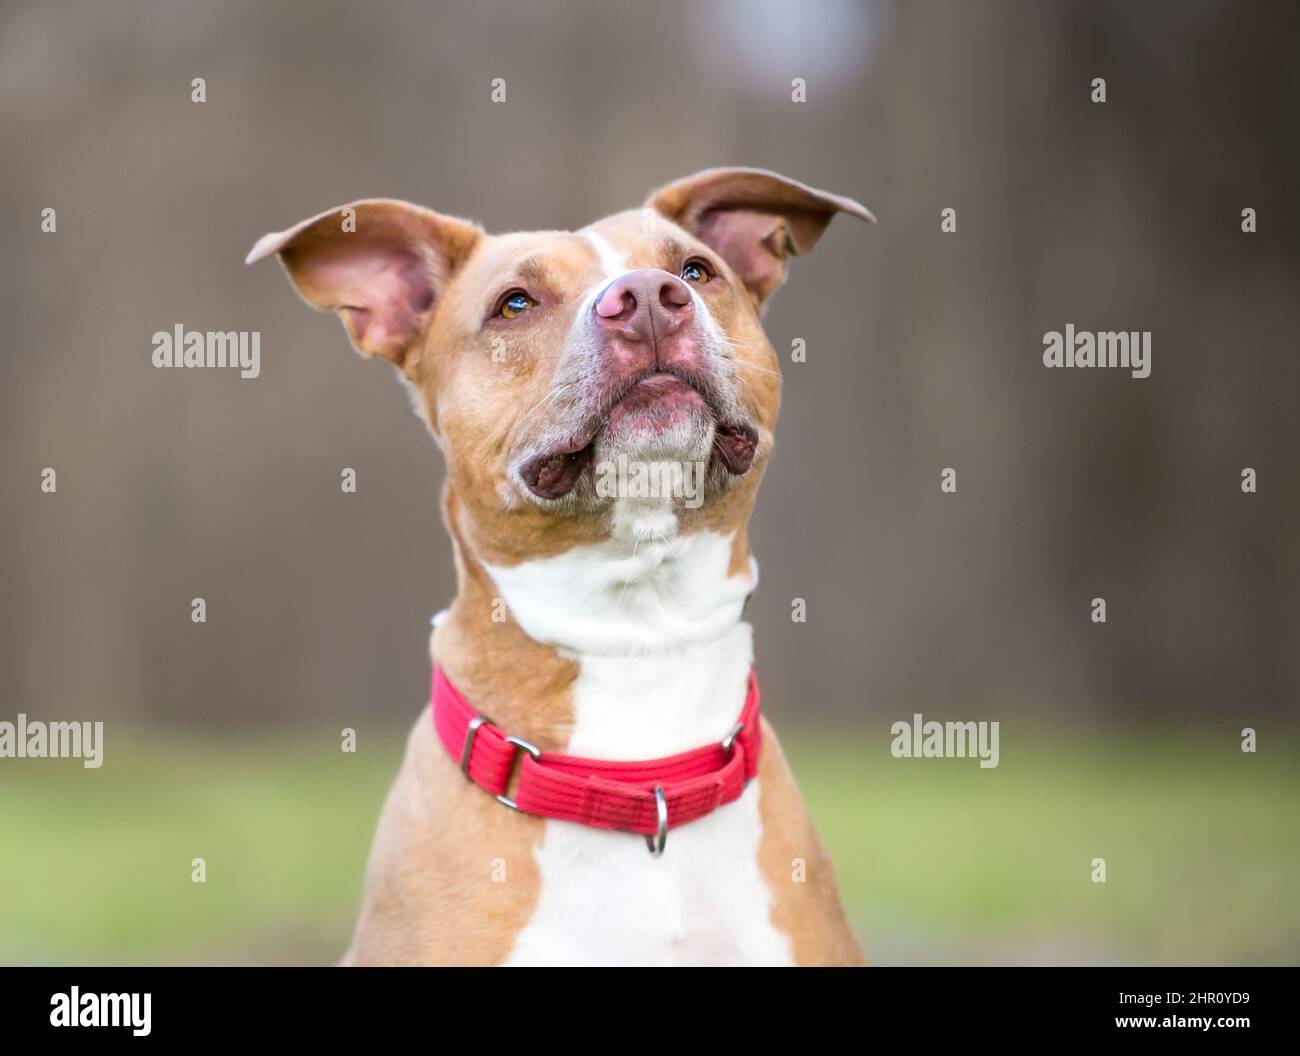 A friendly red and white Pit Bull Terrier mixed breed dog with large floppy ears and wearing a red collar Stock Photo